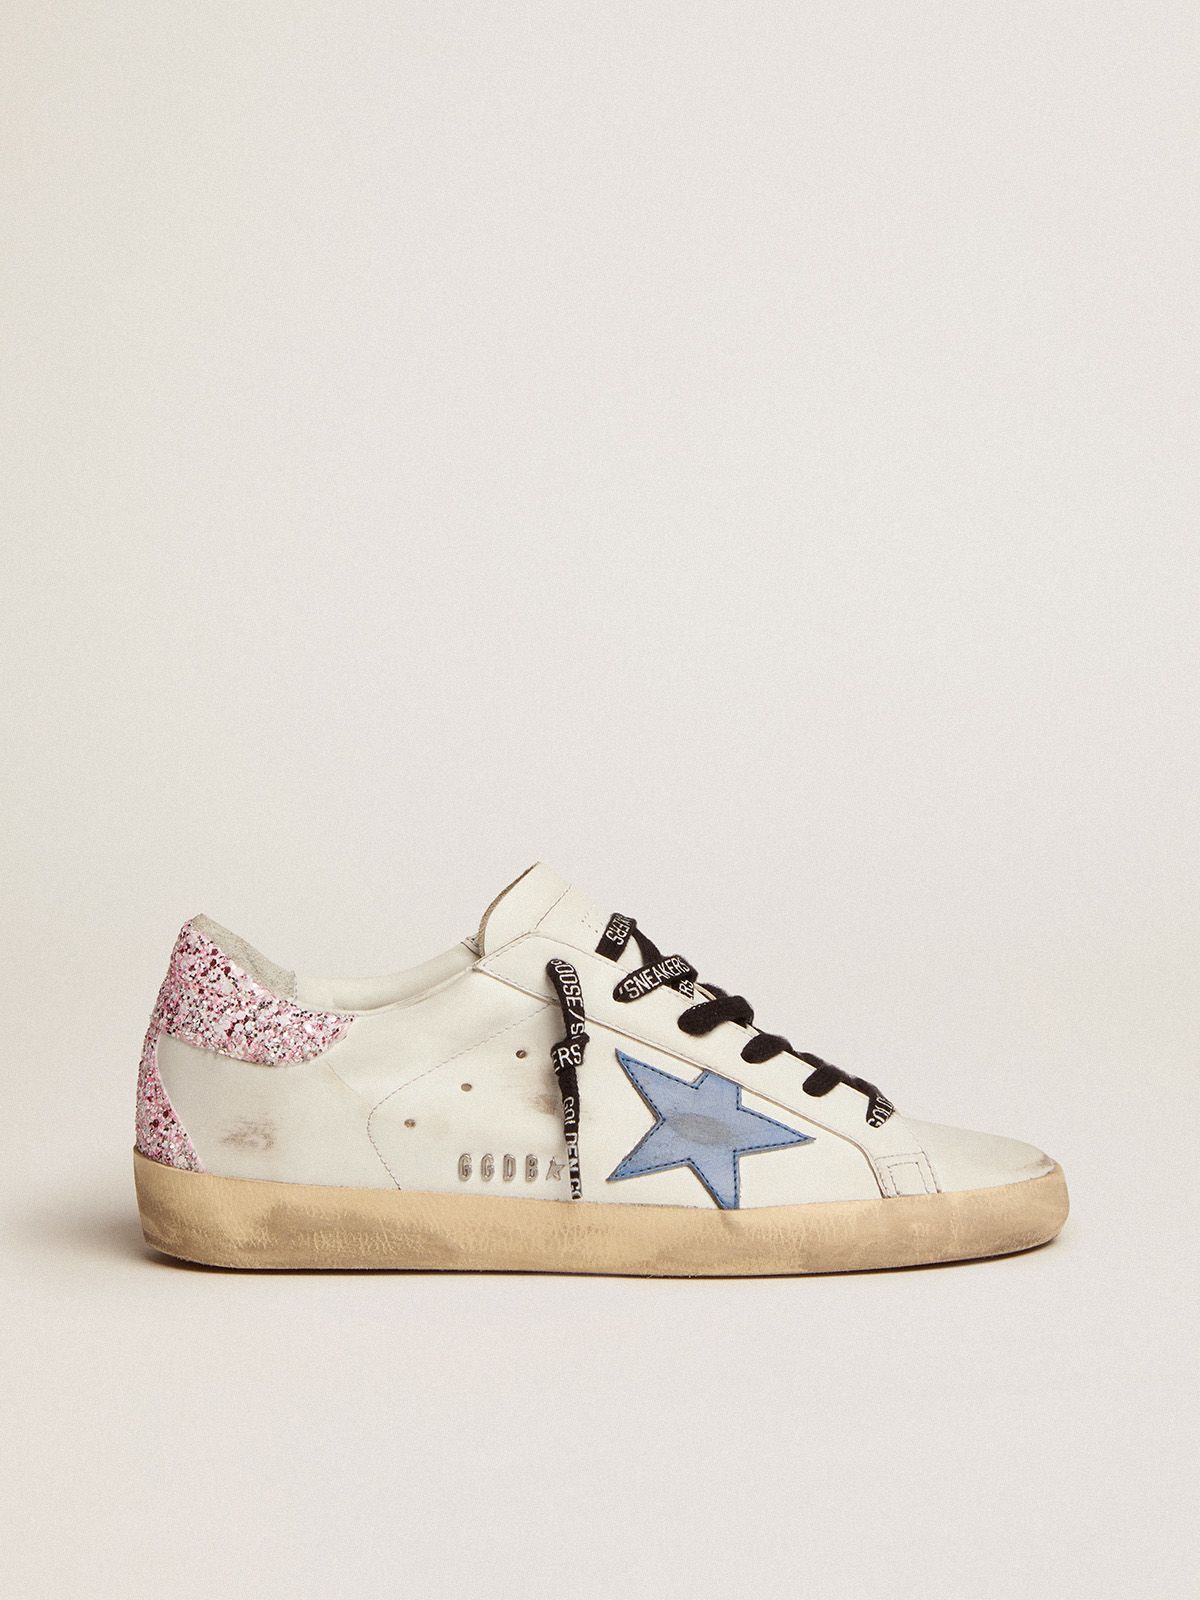 Sneakers Uomo Golden Goose Super-Star sneakers with cobalt-blue leather star and pink glitter heel tab